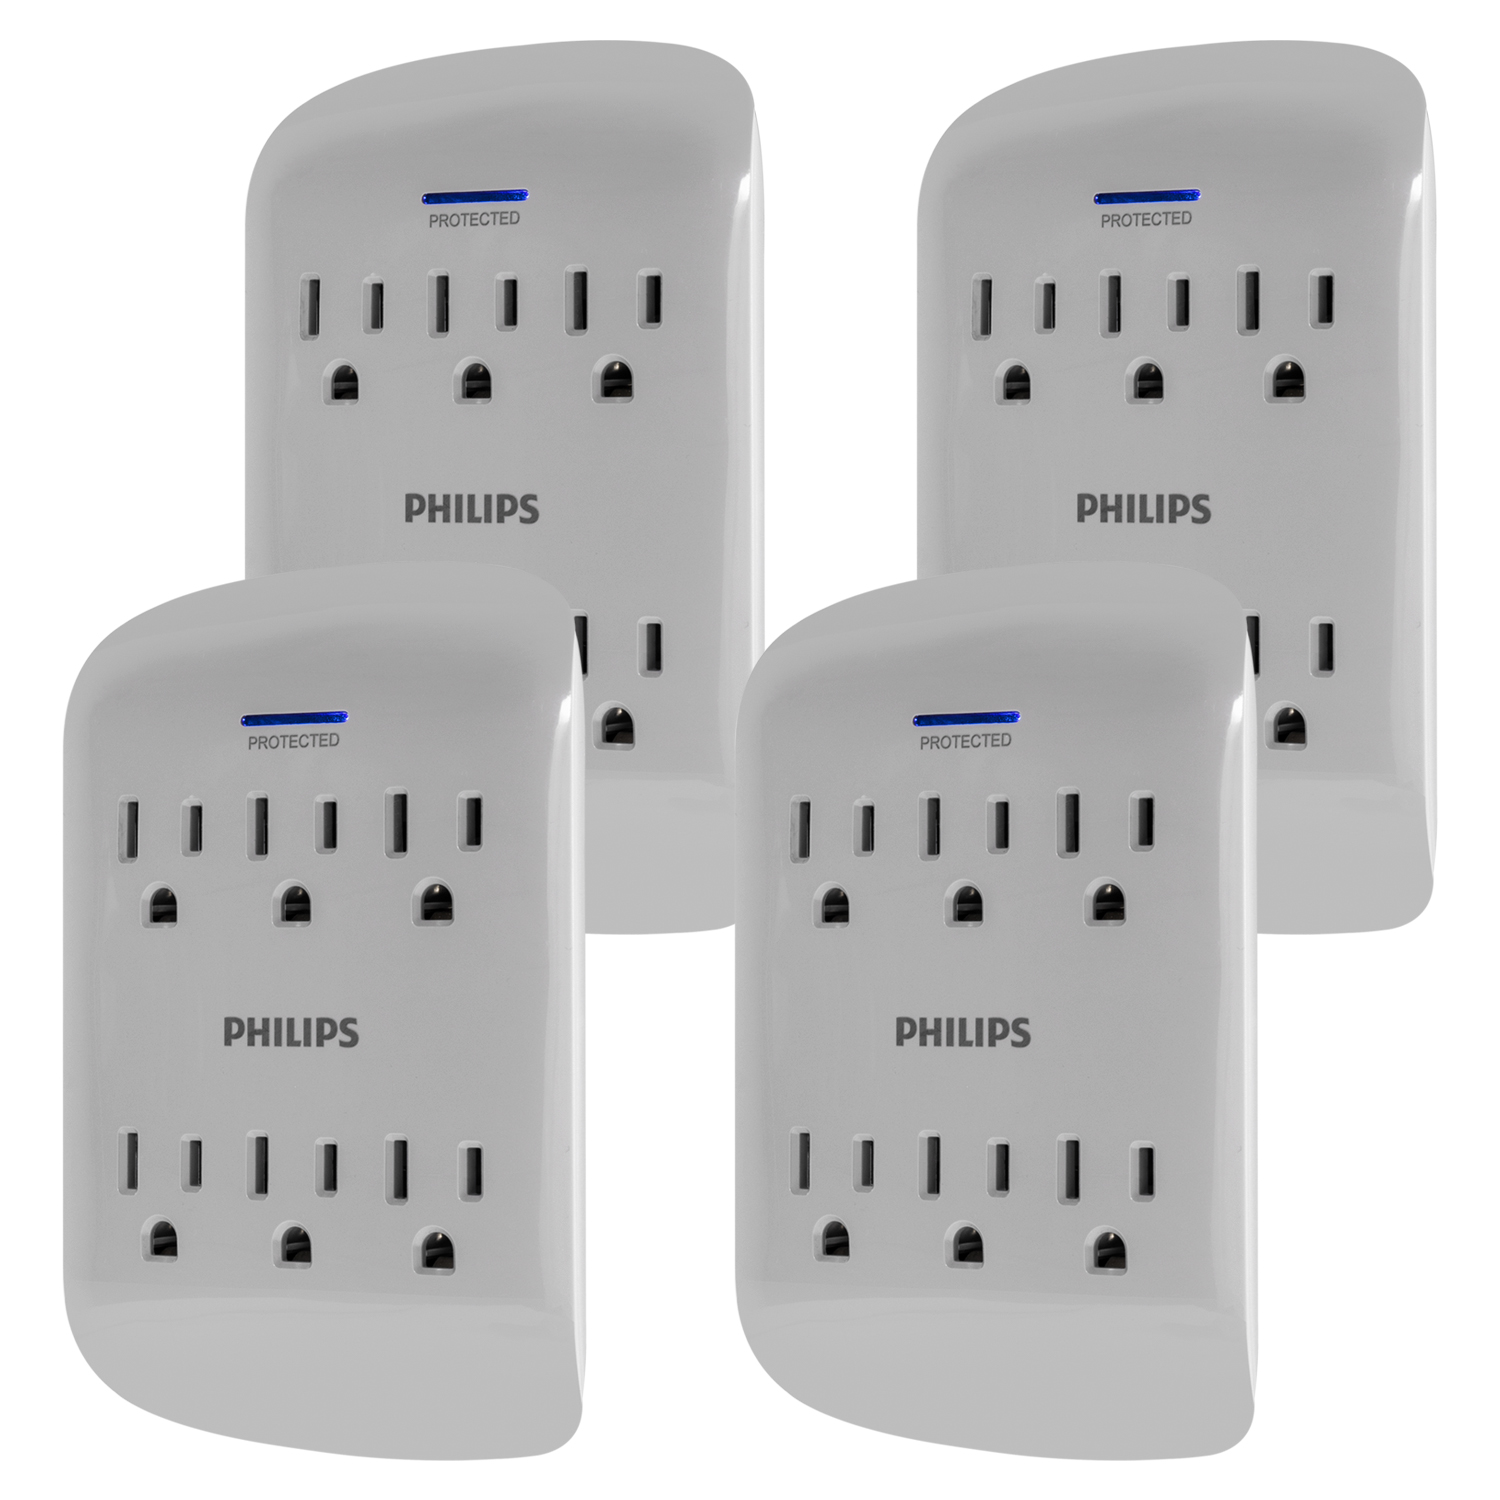 4-Pack of 6-Outlet Philips Extender Surge Protector Wall Tap with 900 Joules for $20 + free shipping on $25+ or Prime